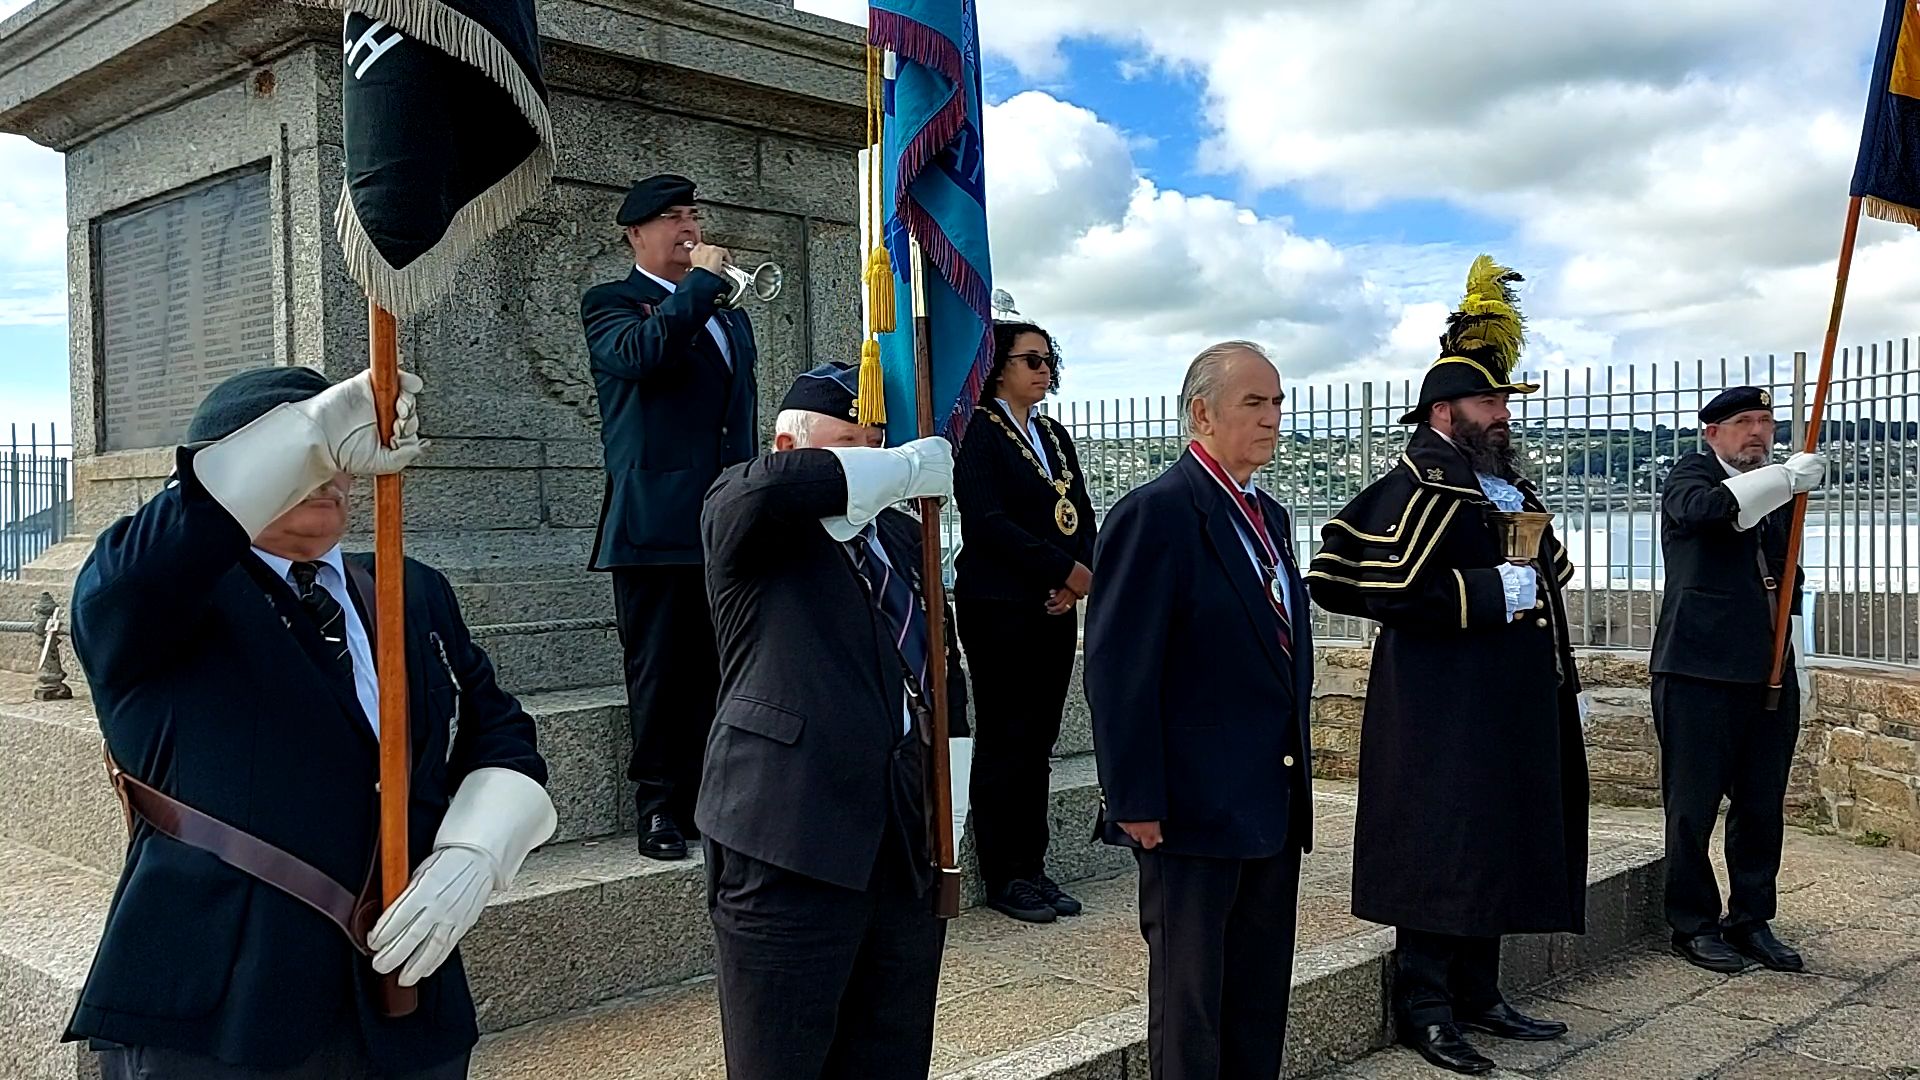 The Last Post being played on VJ Day 75 at Penzance Cenotaph, 2020